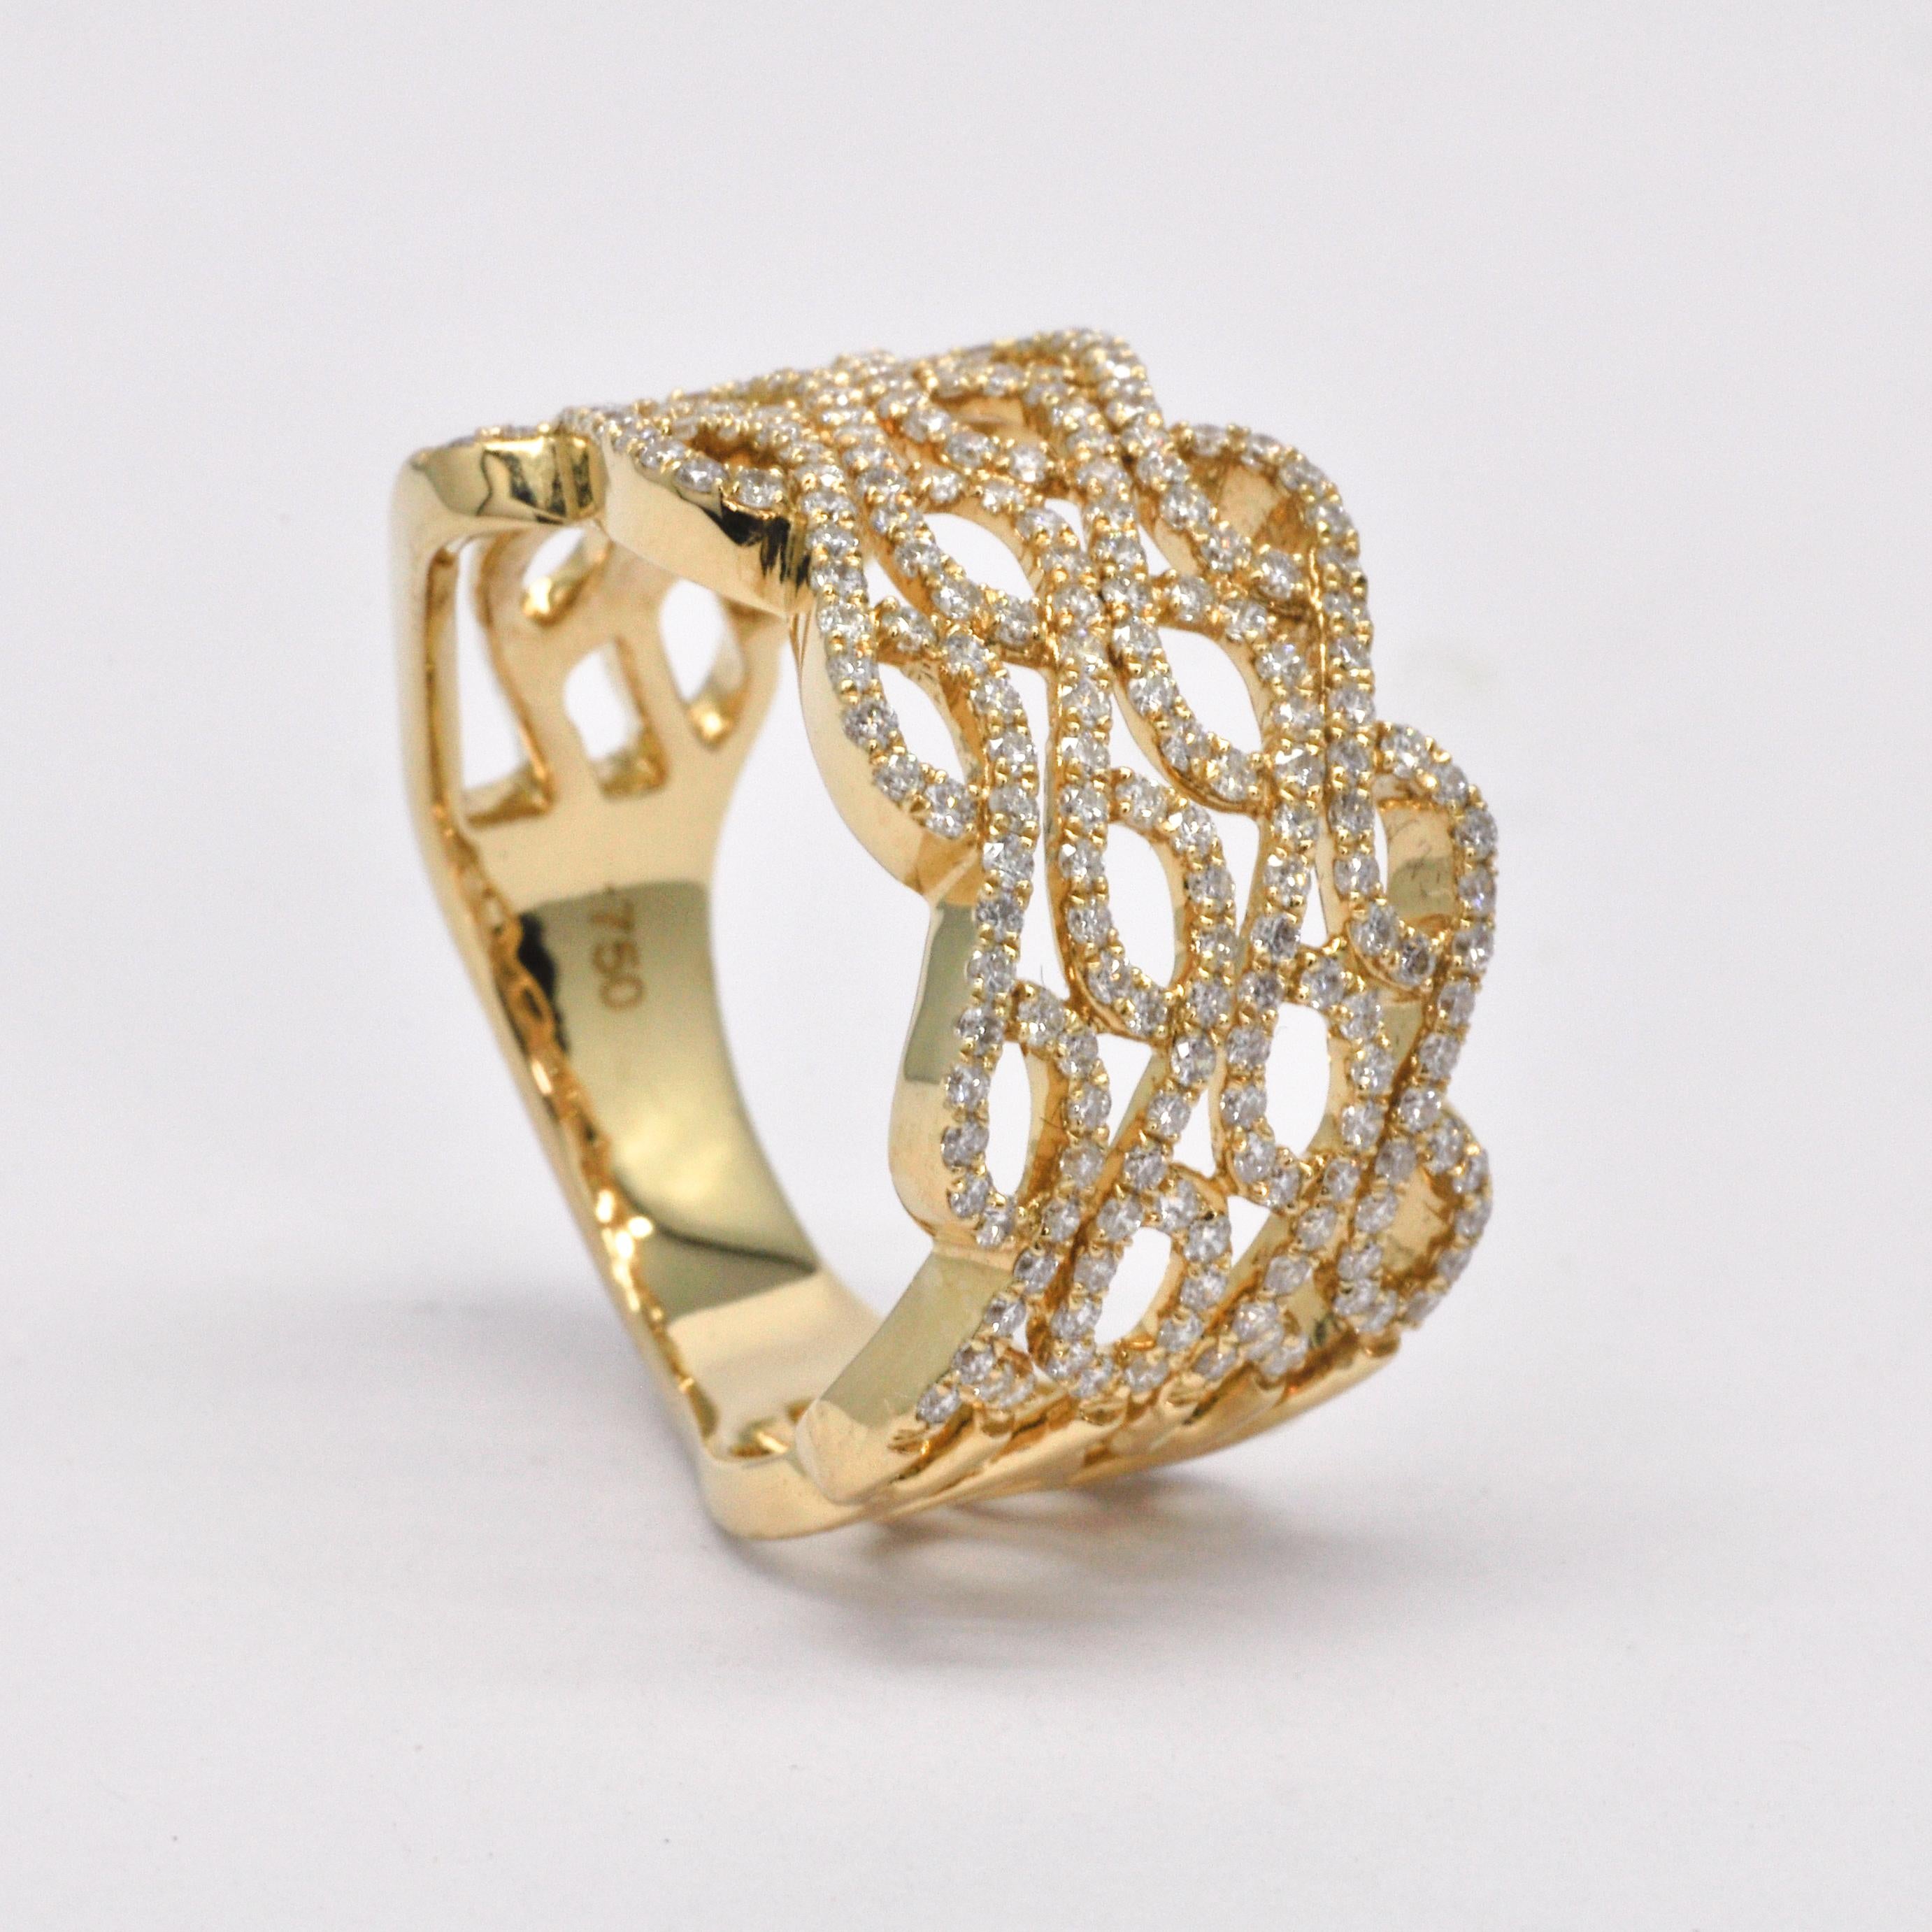 This elegant 18kt gold ring is a true masterpiece, featuring a beautifully carved pattern that adds a touch of sophistication and style to the design. The ring is adorned with pave set round natural diamonds, which add a touch of sparkle and glamour